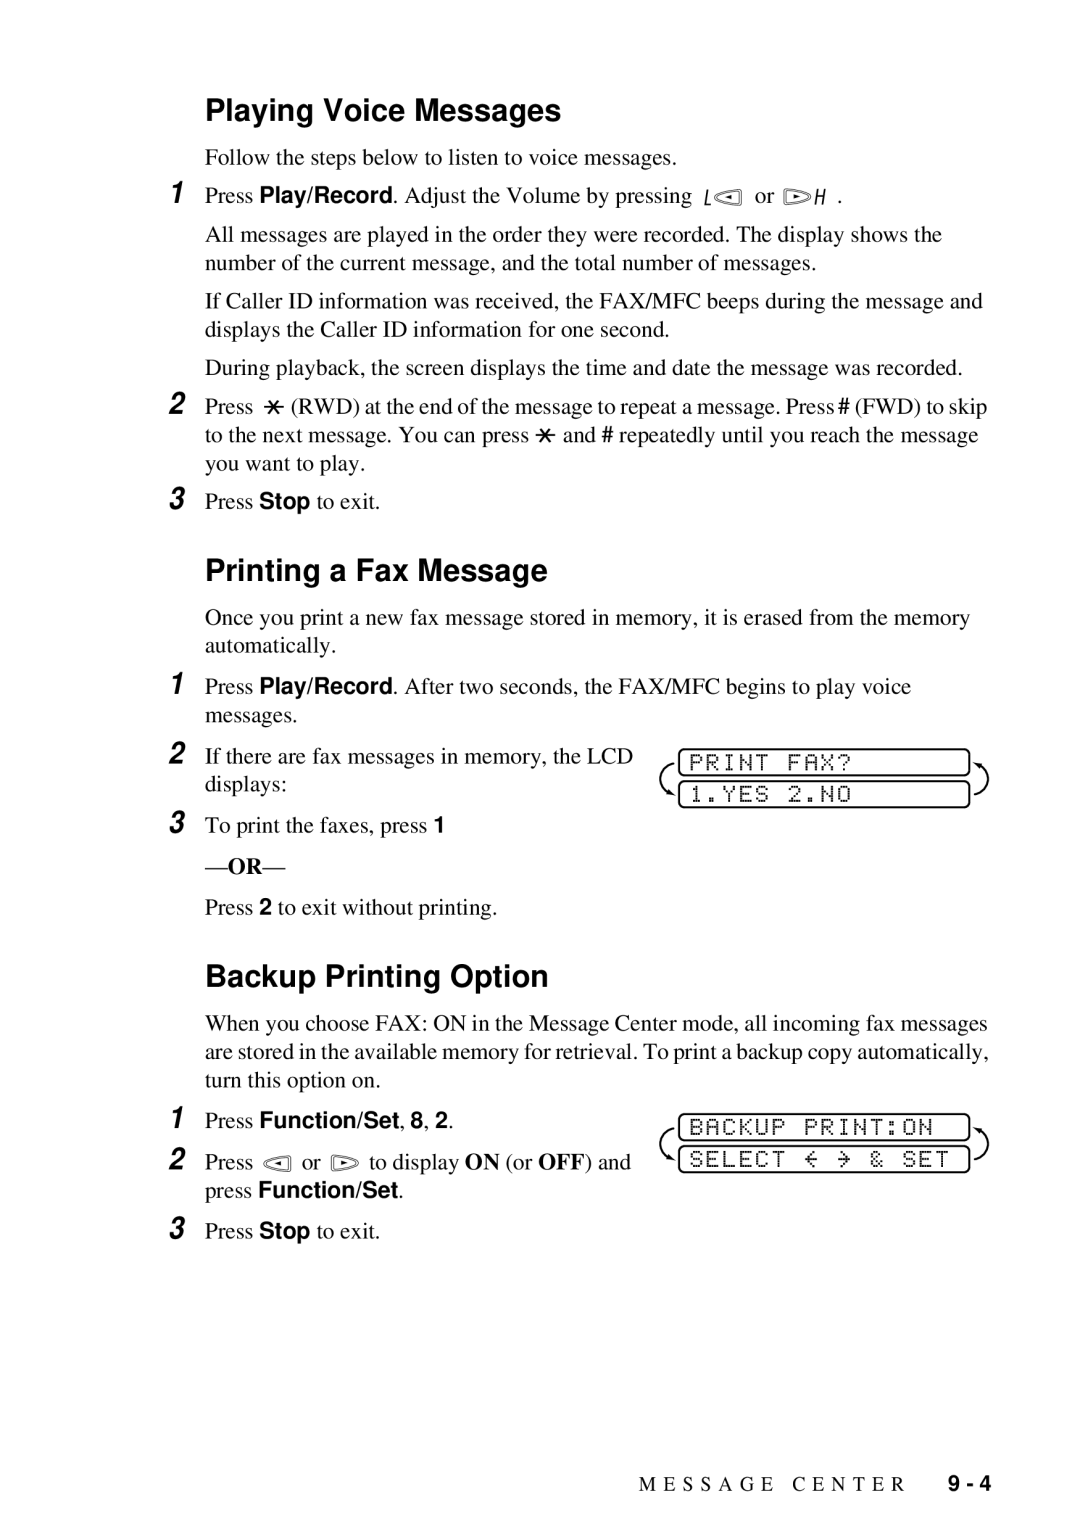 Brother FAX 580MC Playing Voice Messages, Printing a Fax Message, Backup Printing Option, Print FAX?, Backup Printon 